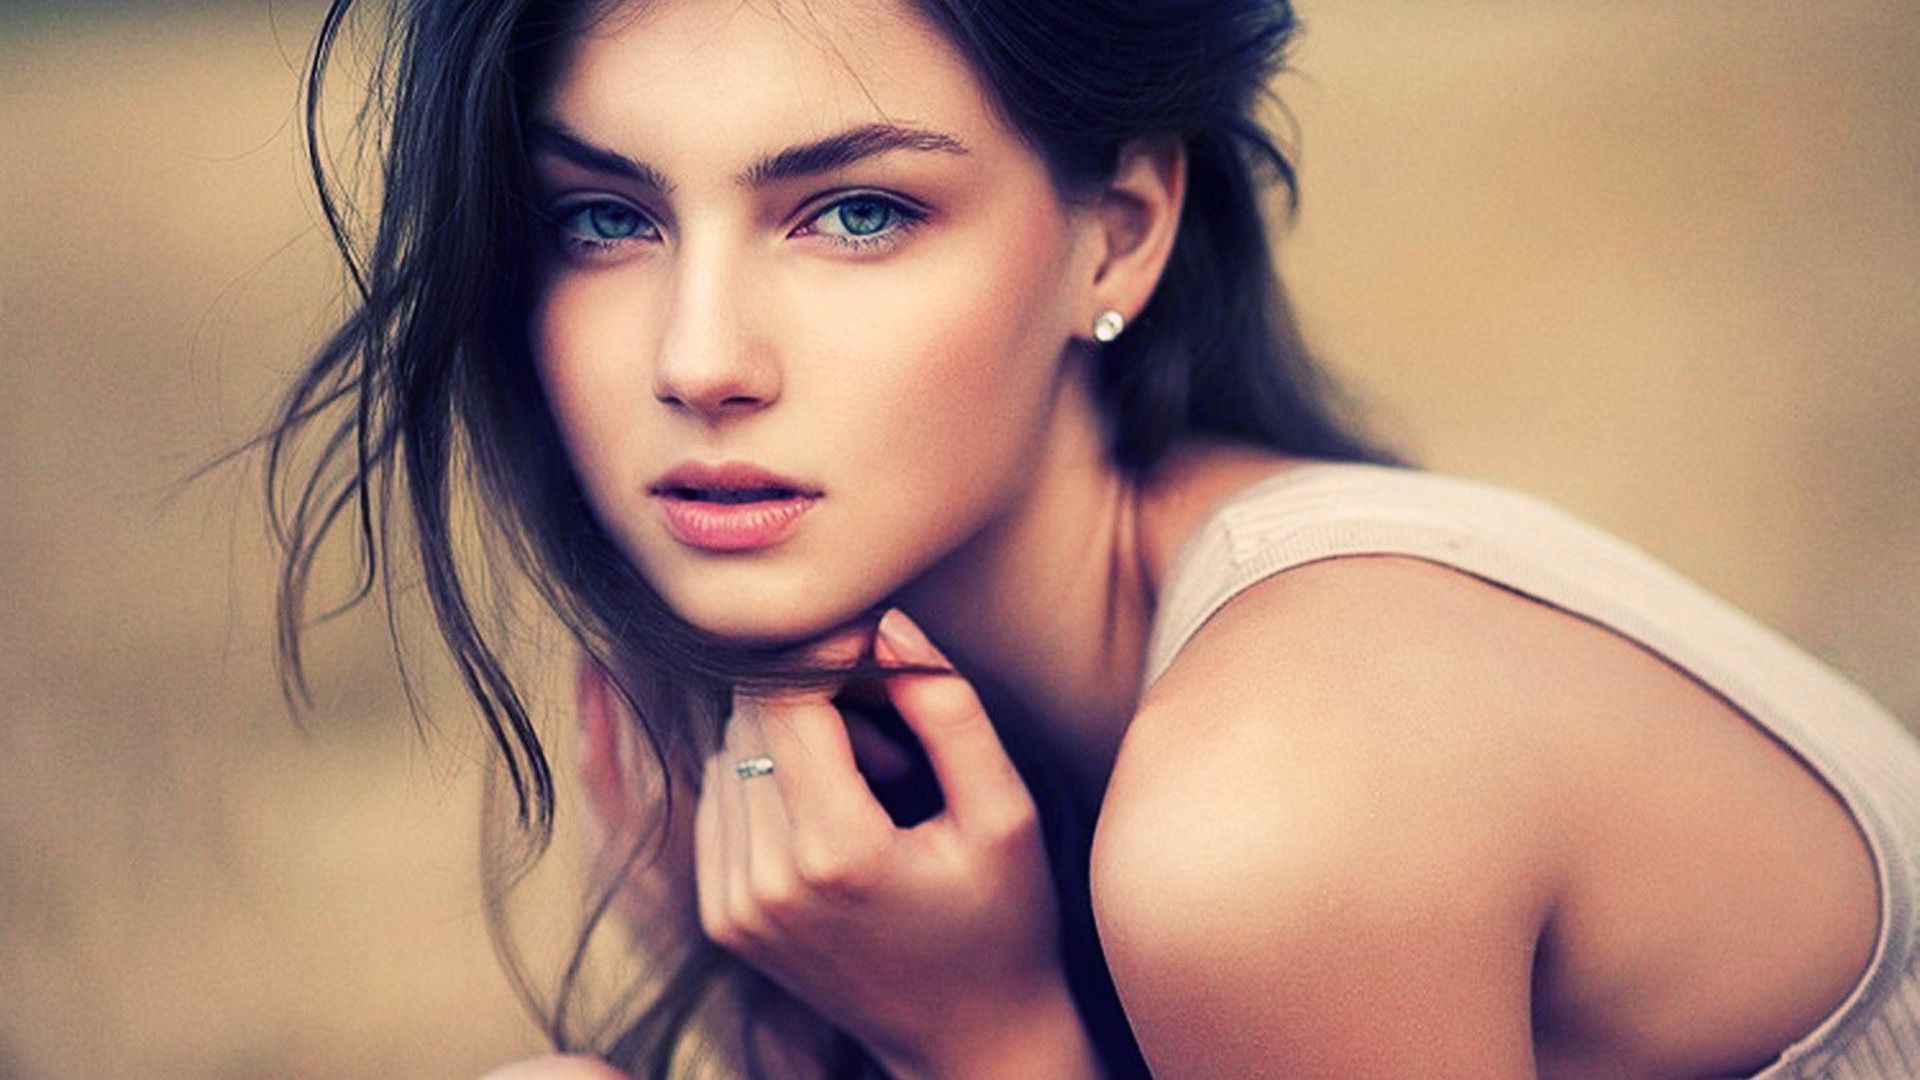 Blue Eyes Girls HD Wallpapers - , New Wallpapers, New Backgrounds